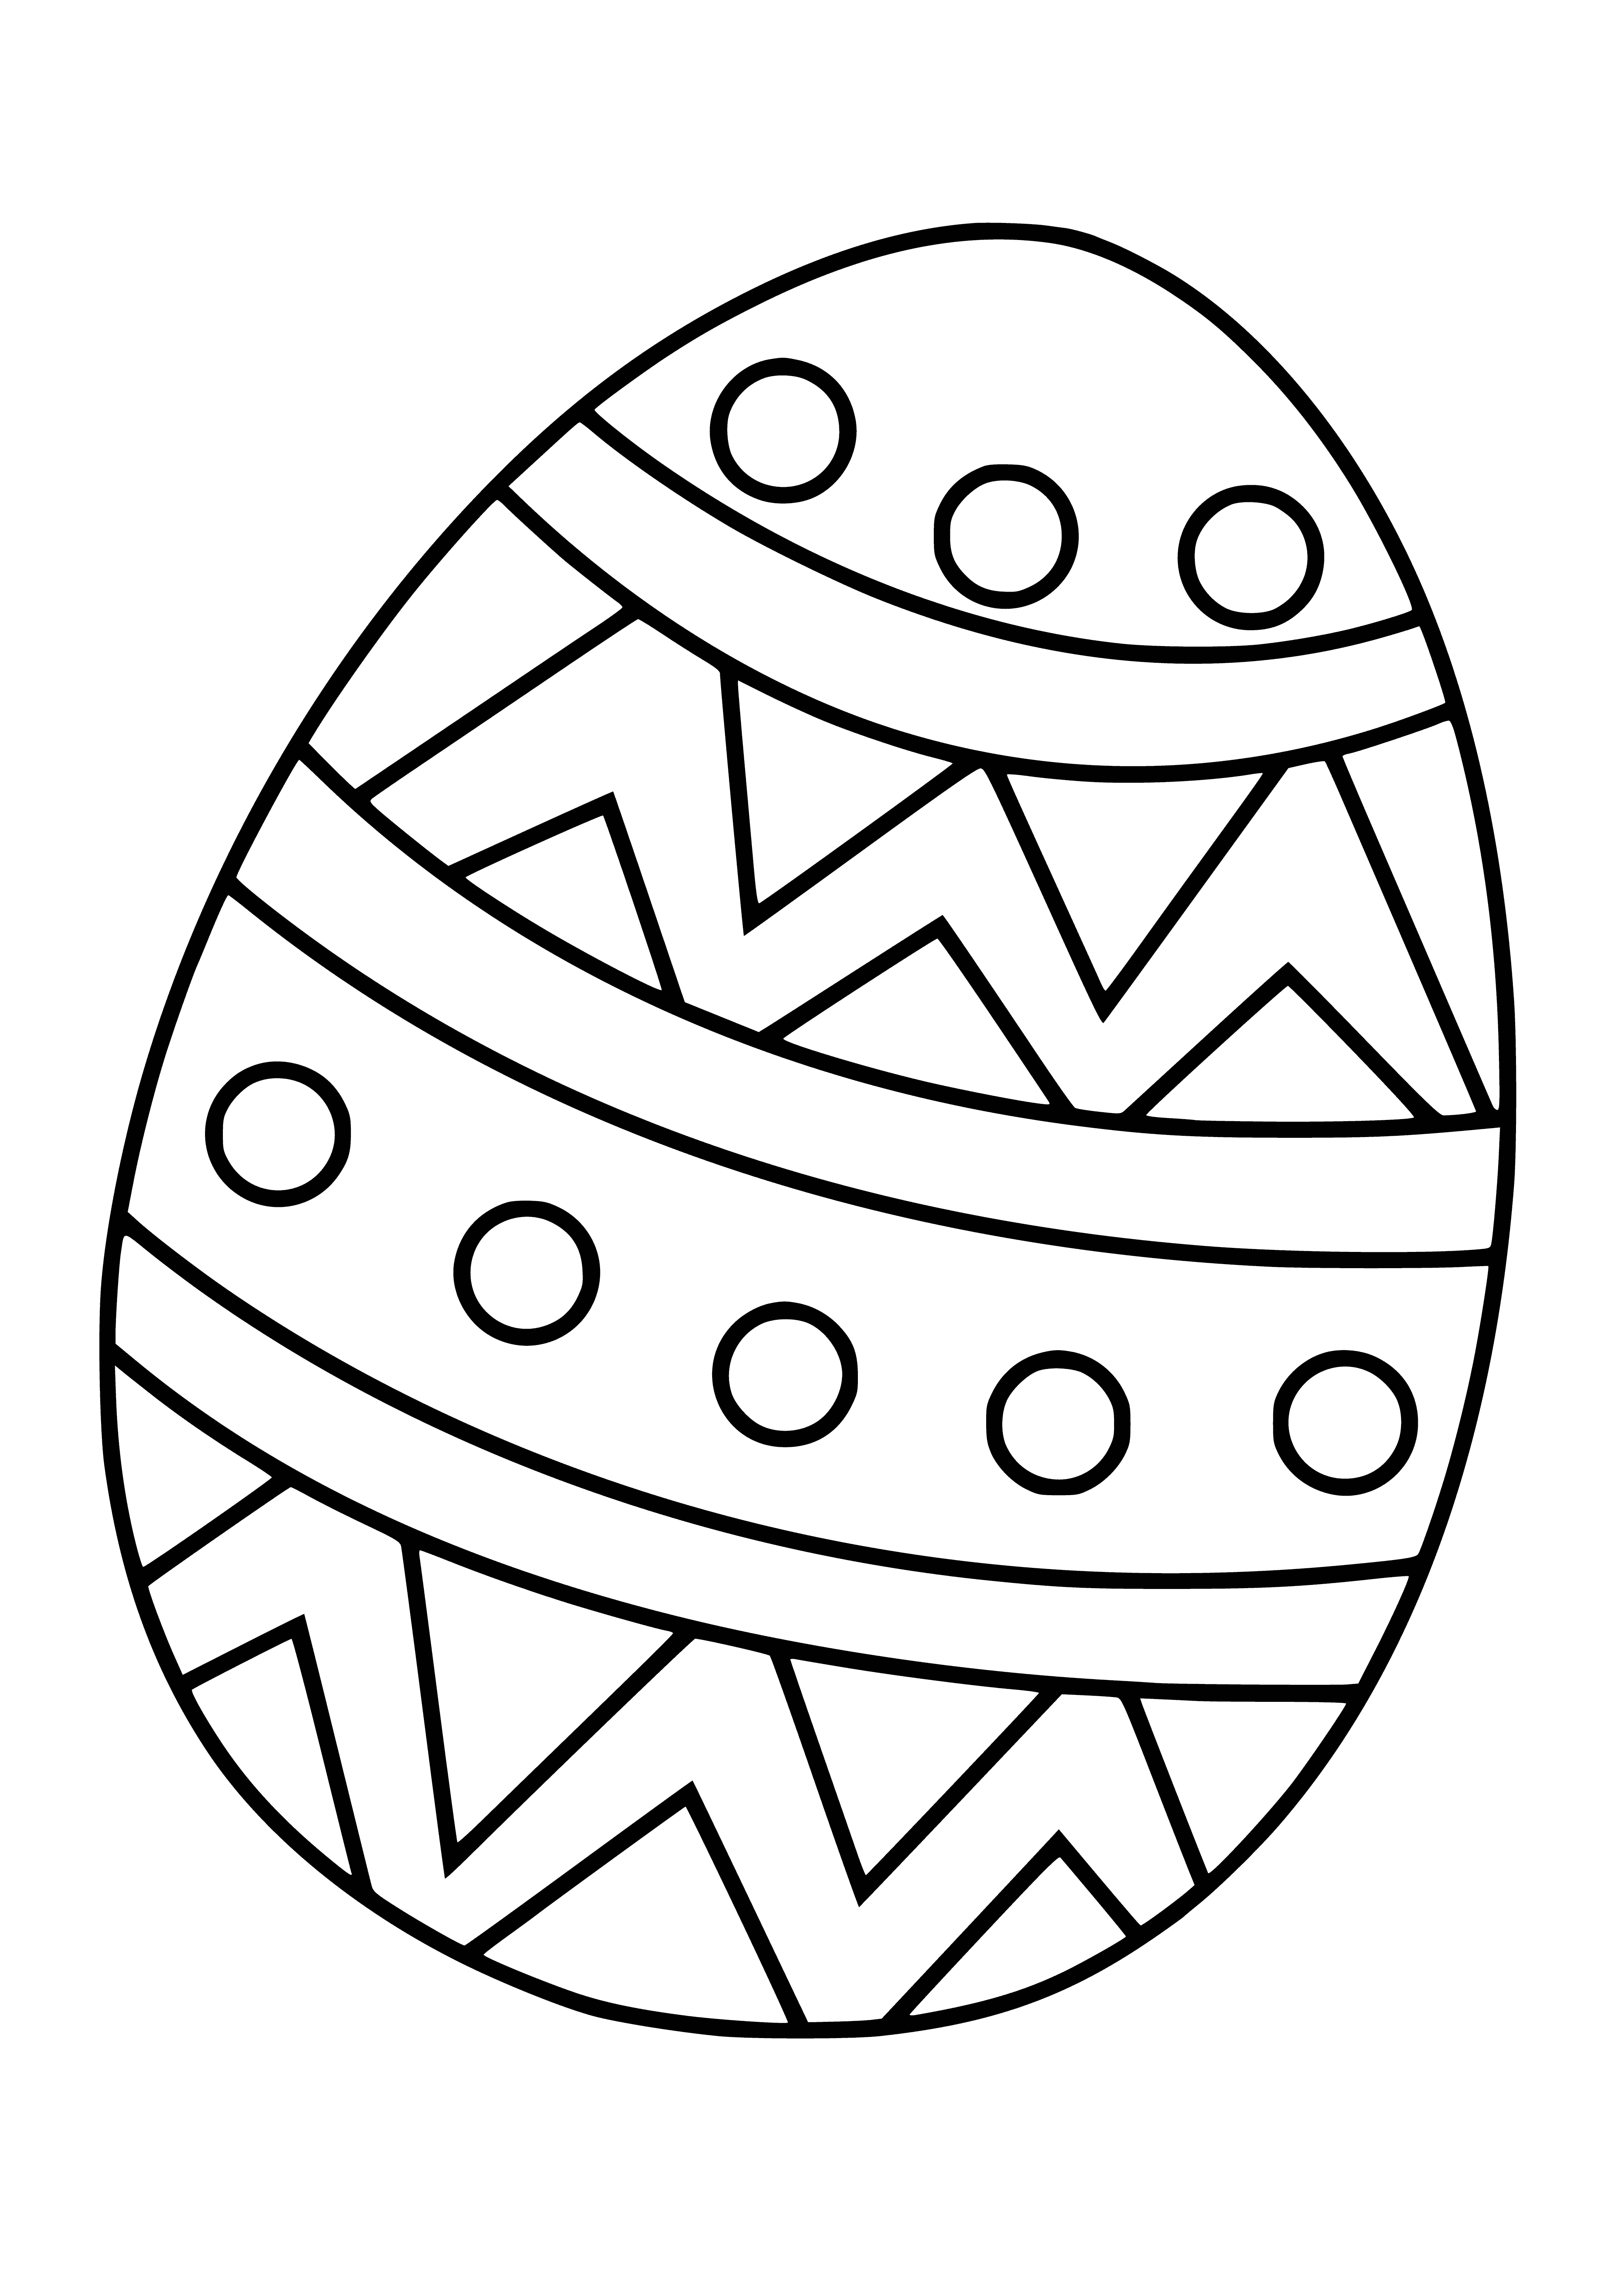 coloring page: A basket with three polka dot eggs, a white bunny with a blue bow tie. #easter